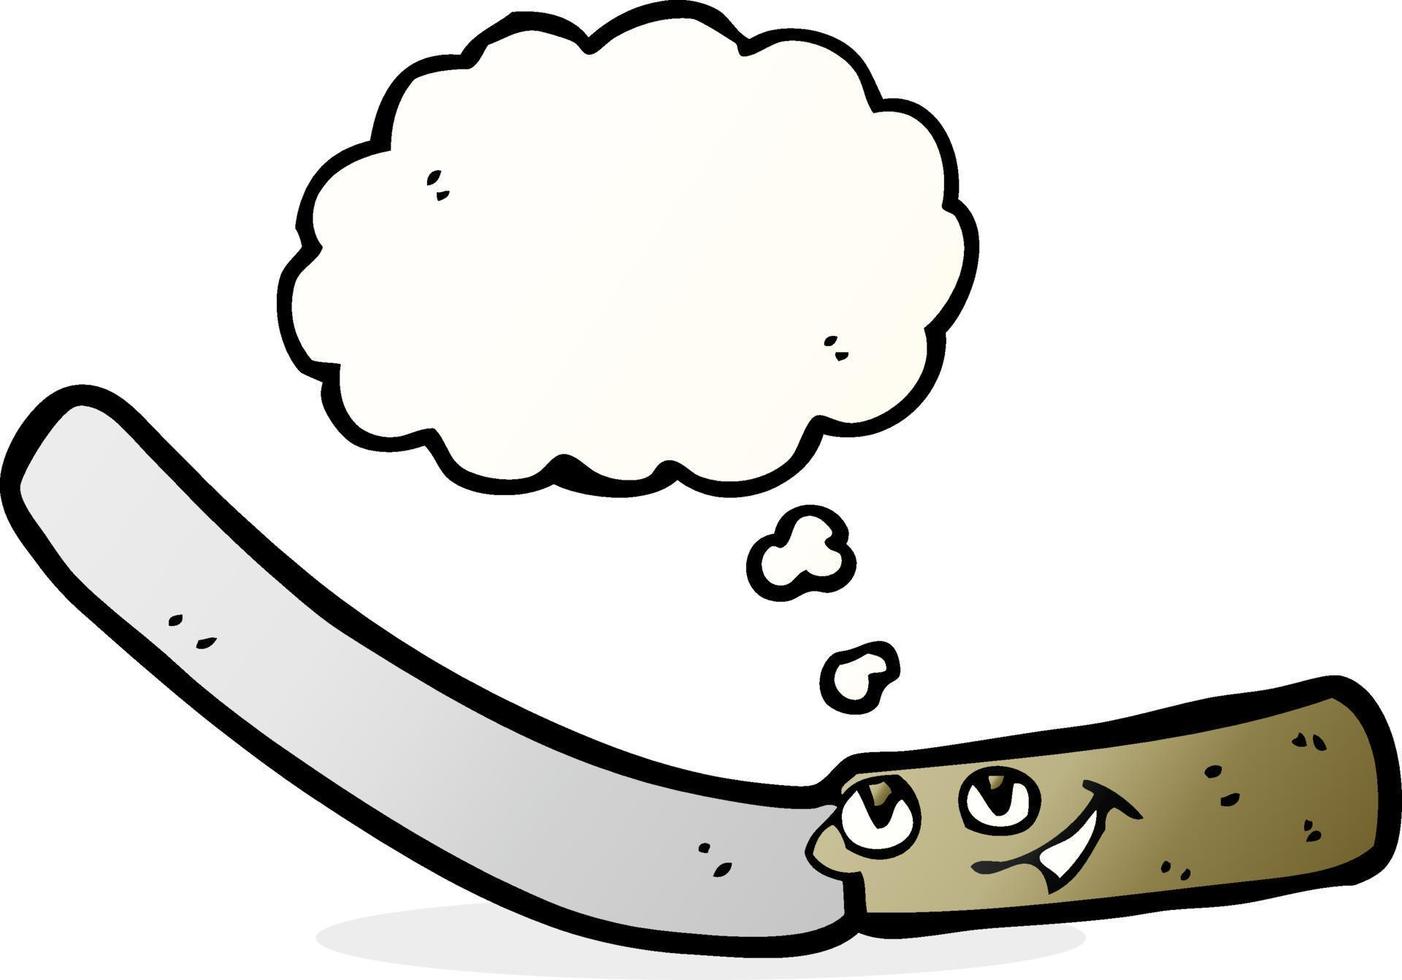 cartoon kitchen knife with thought bubble vector